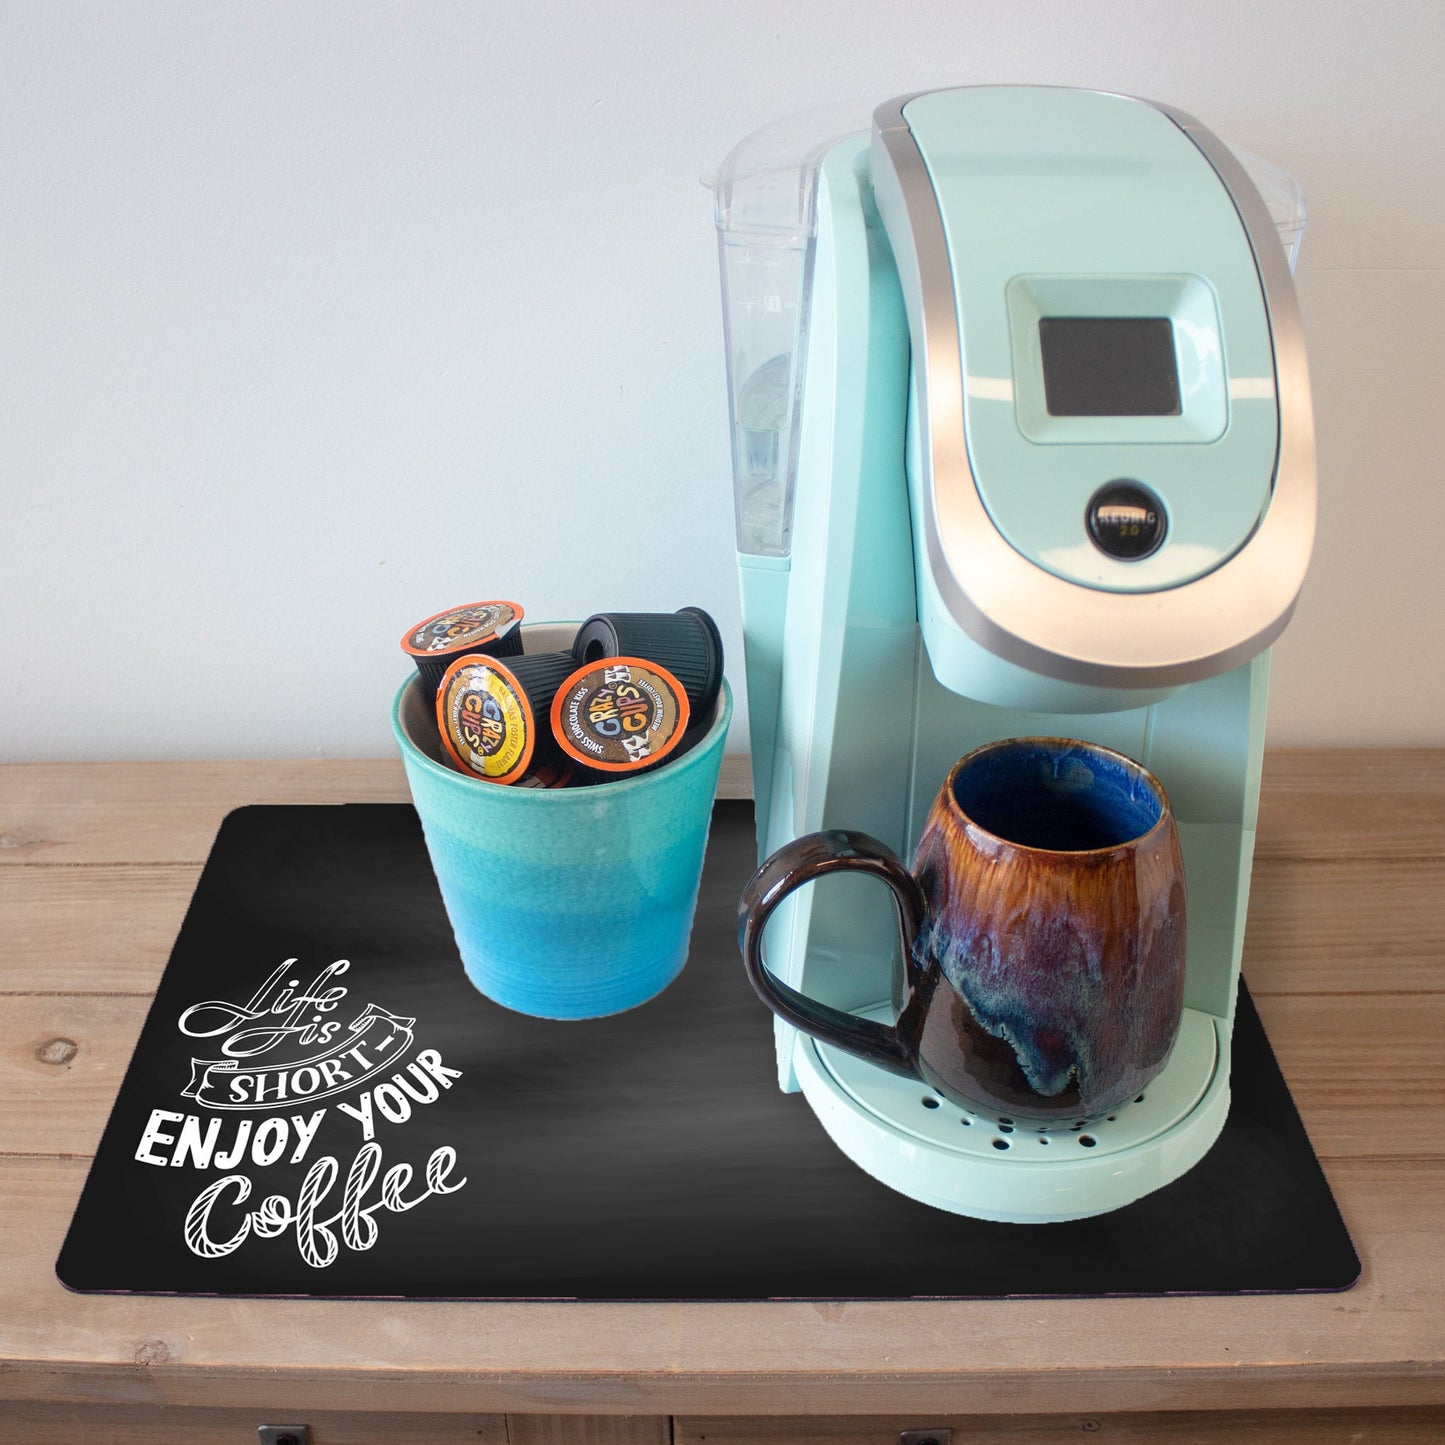 A light blue coffee maker on a wooden countertop with a ceramic mug that has a marbled blue and brown glaze and a turquoise cup holding several coffee pods. The setup is placed on a black coffee mat featuring the phrase "Life is Short, Enjoy Your Coffee" in a stylish white font.